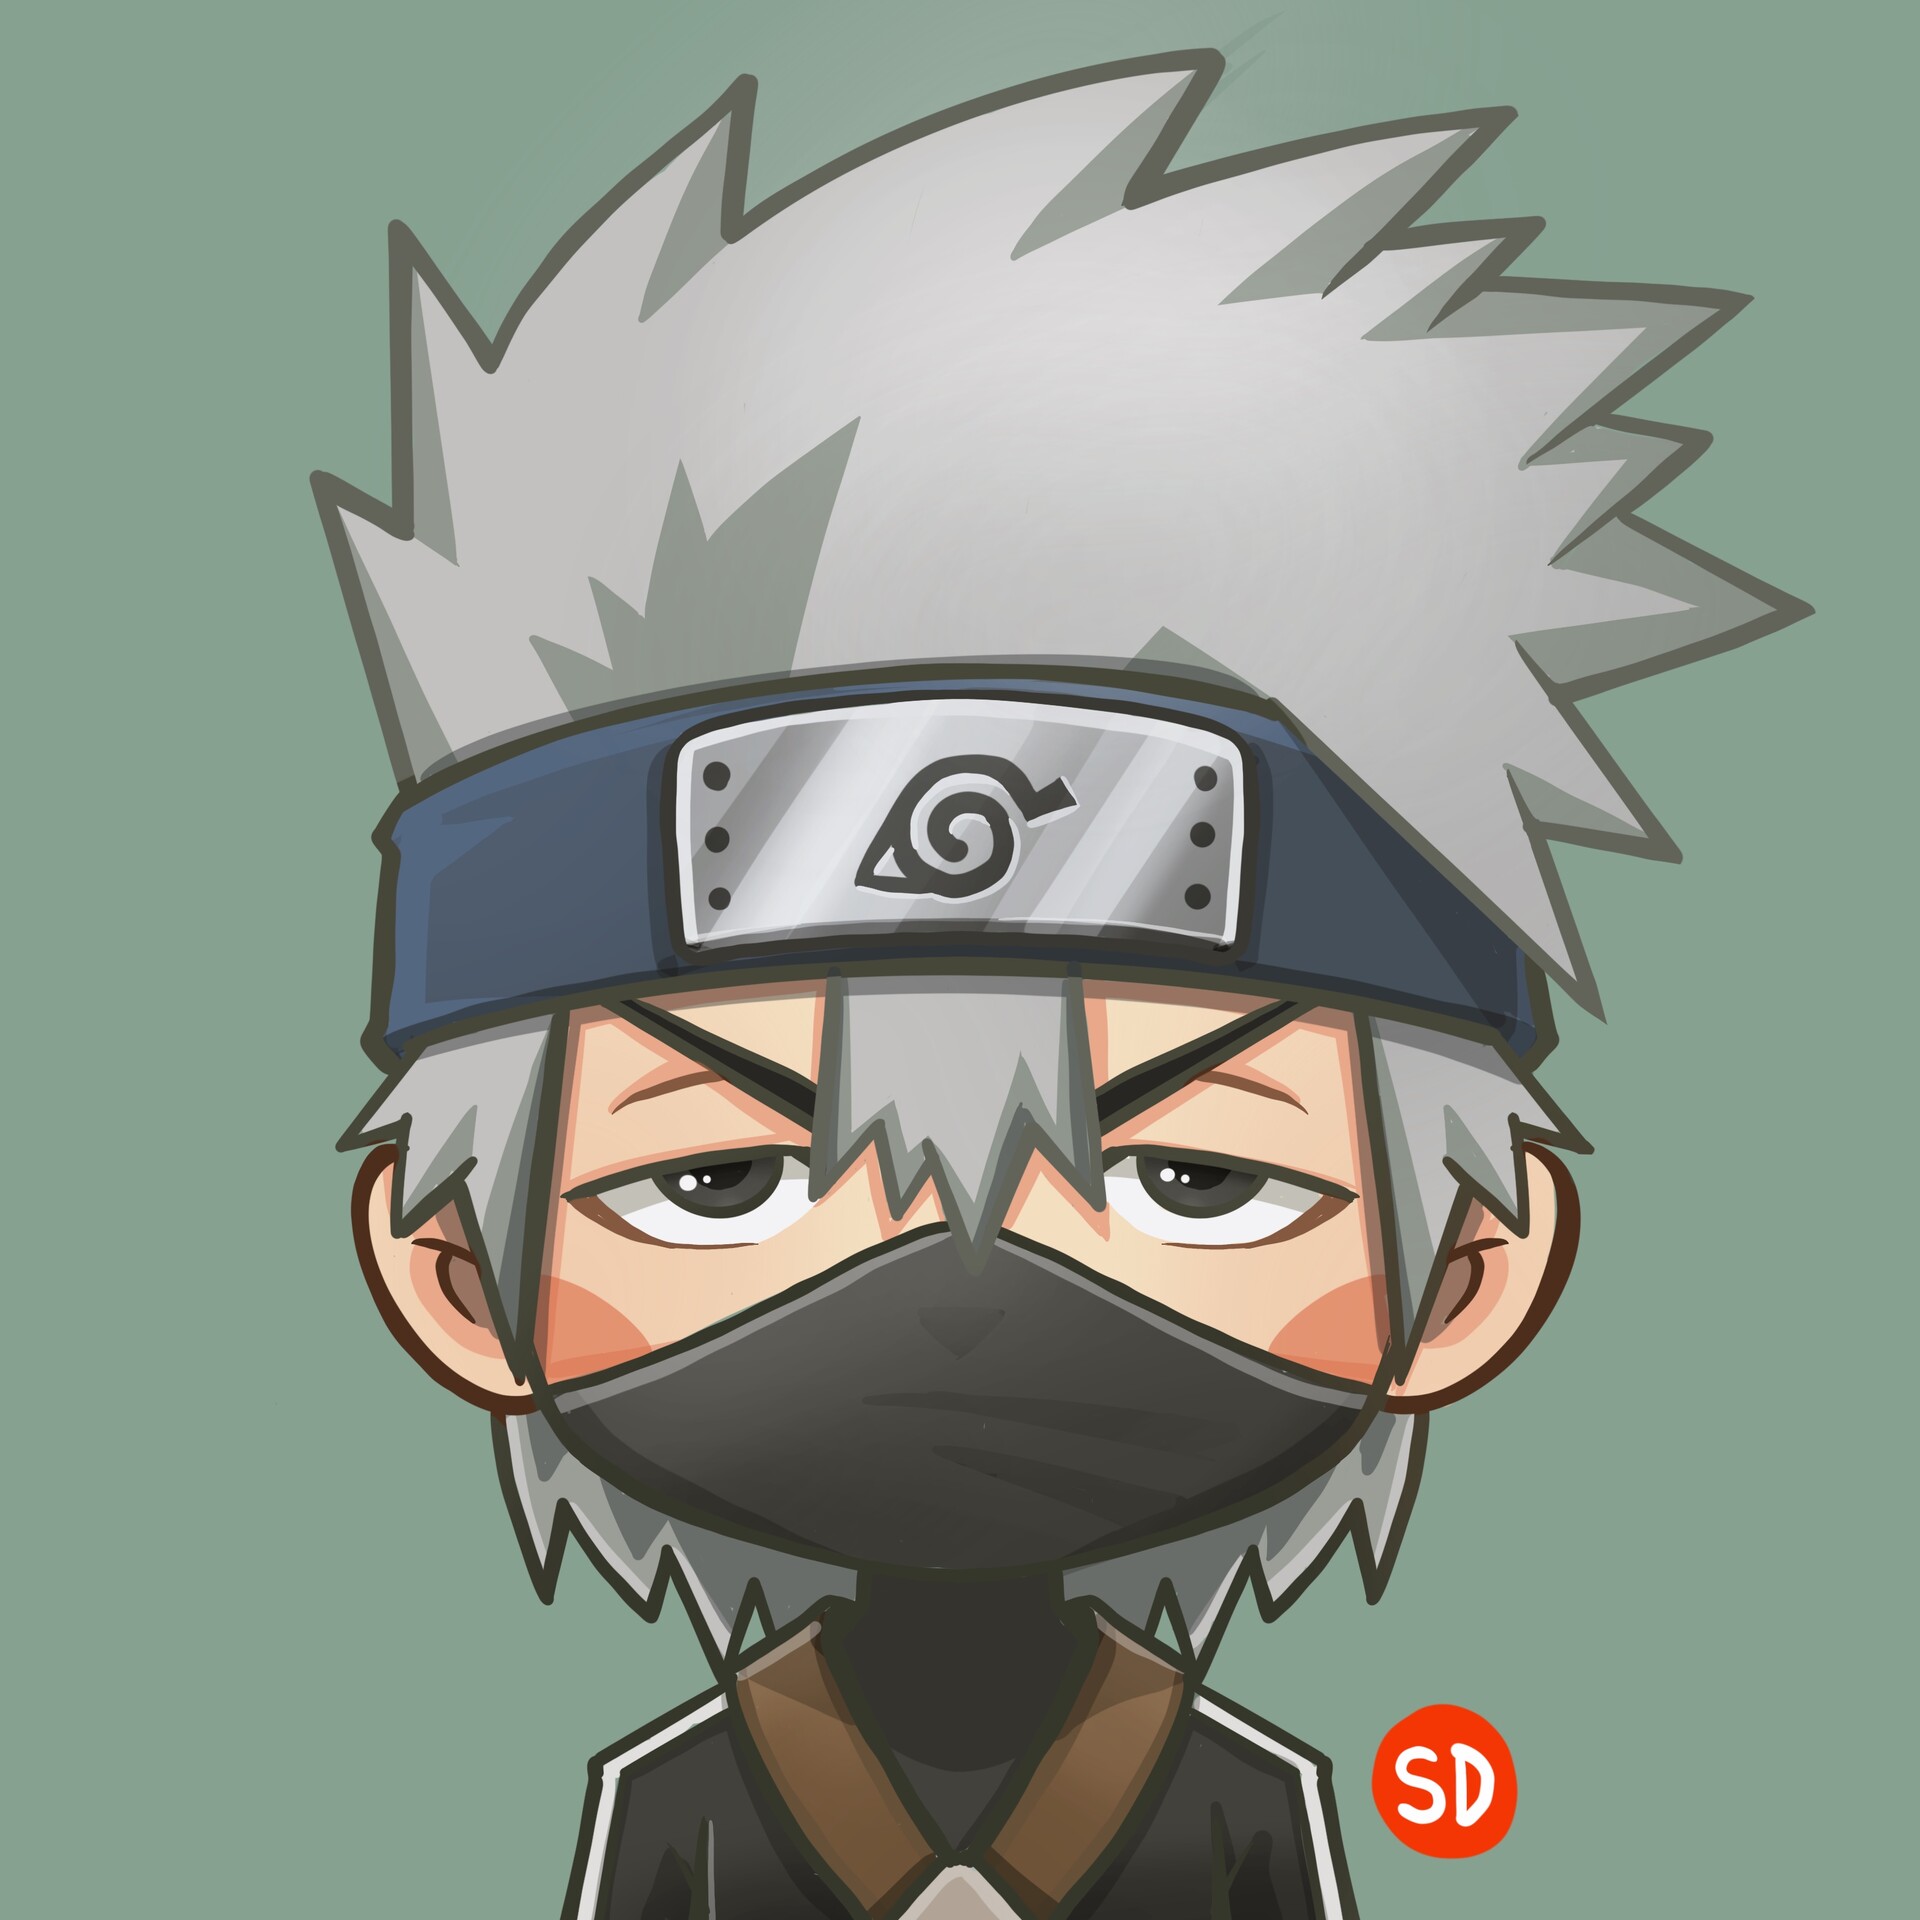 ArtStation - just some drawings of characters from the anime naruto